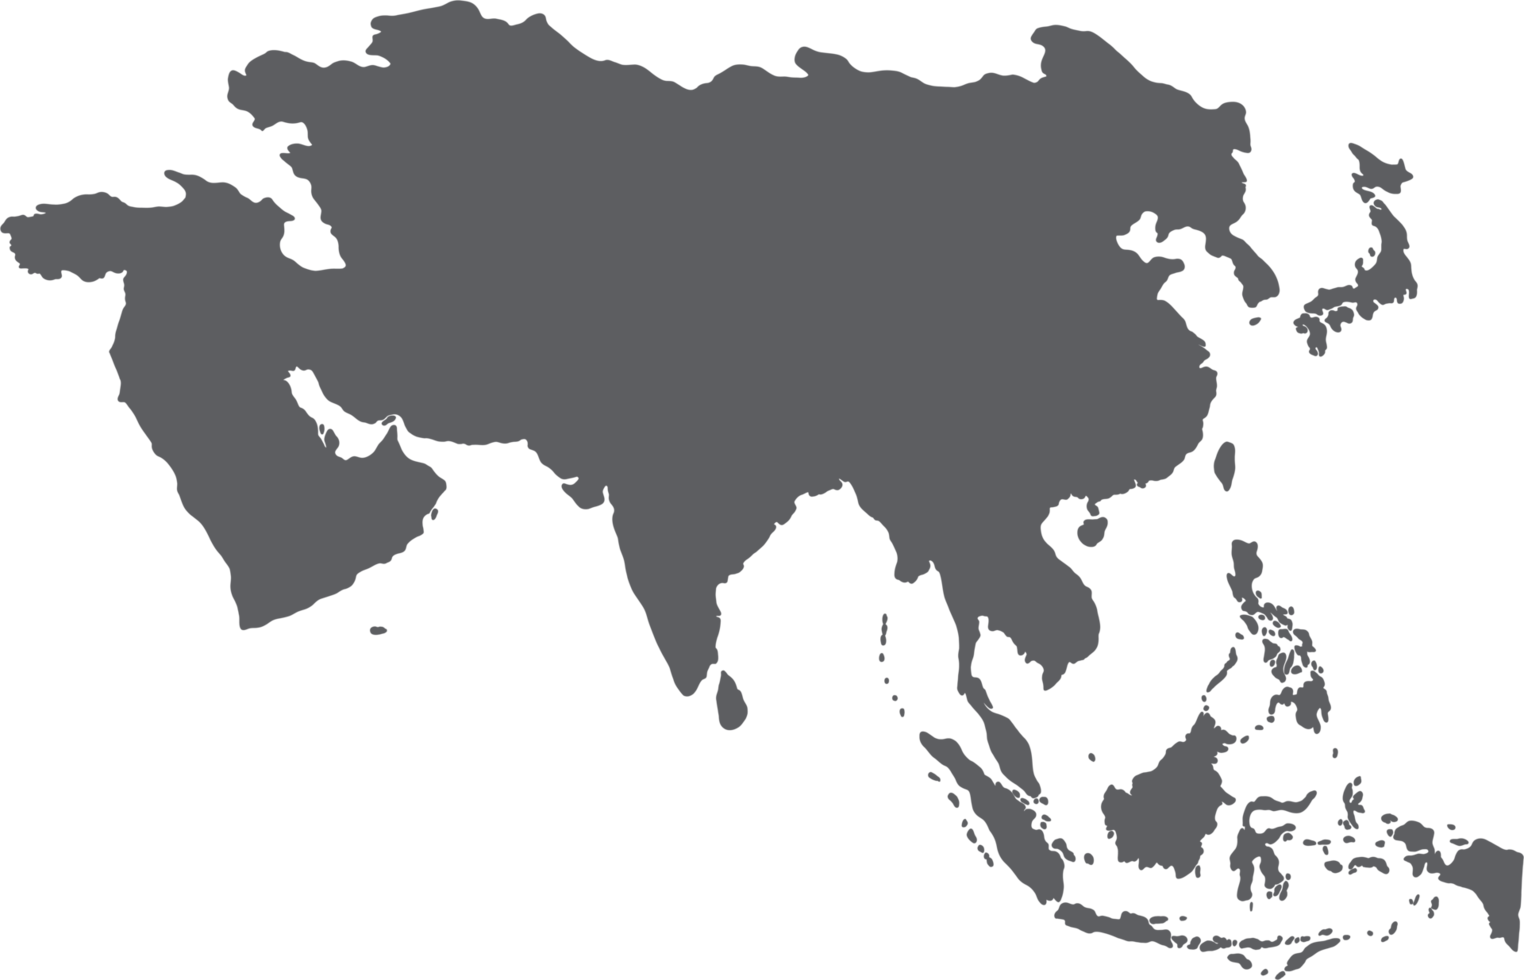 doodle freehand drawing of asia countries map. png